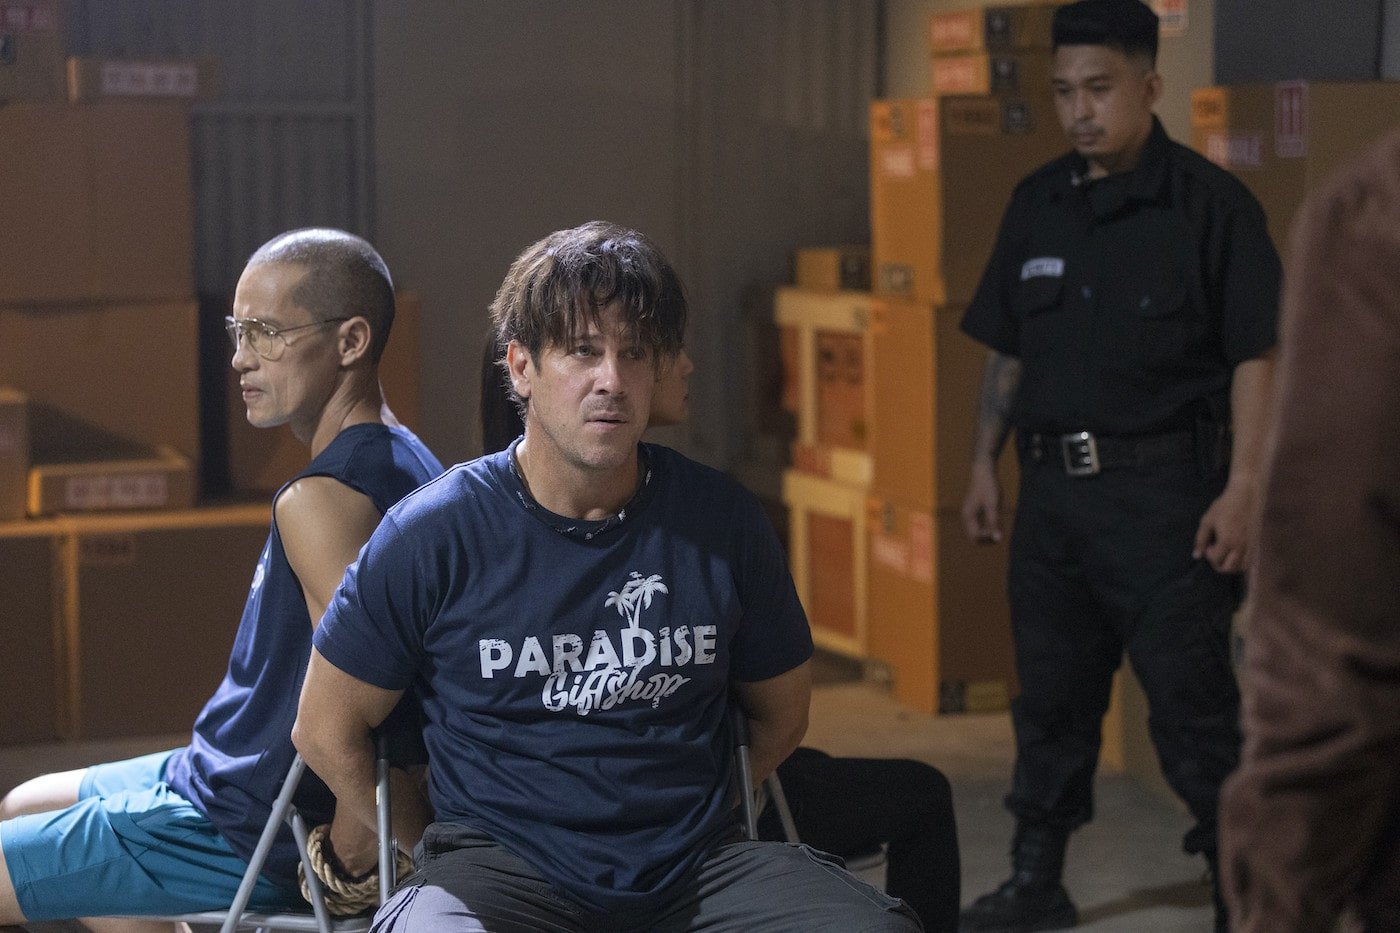 Art Acuña and Christian Kane tied to chairs in 'Almost Paradise'